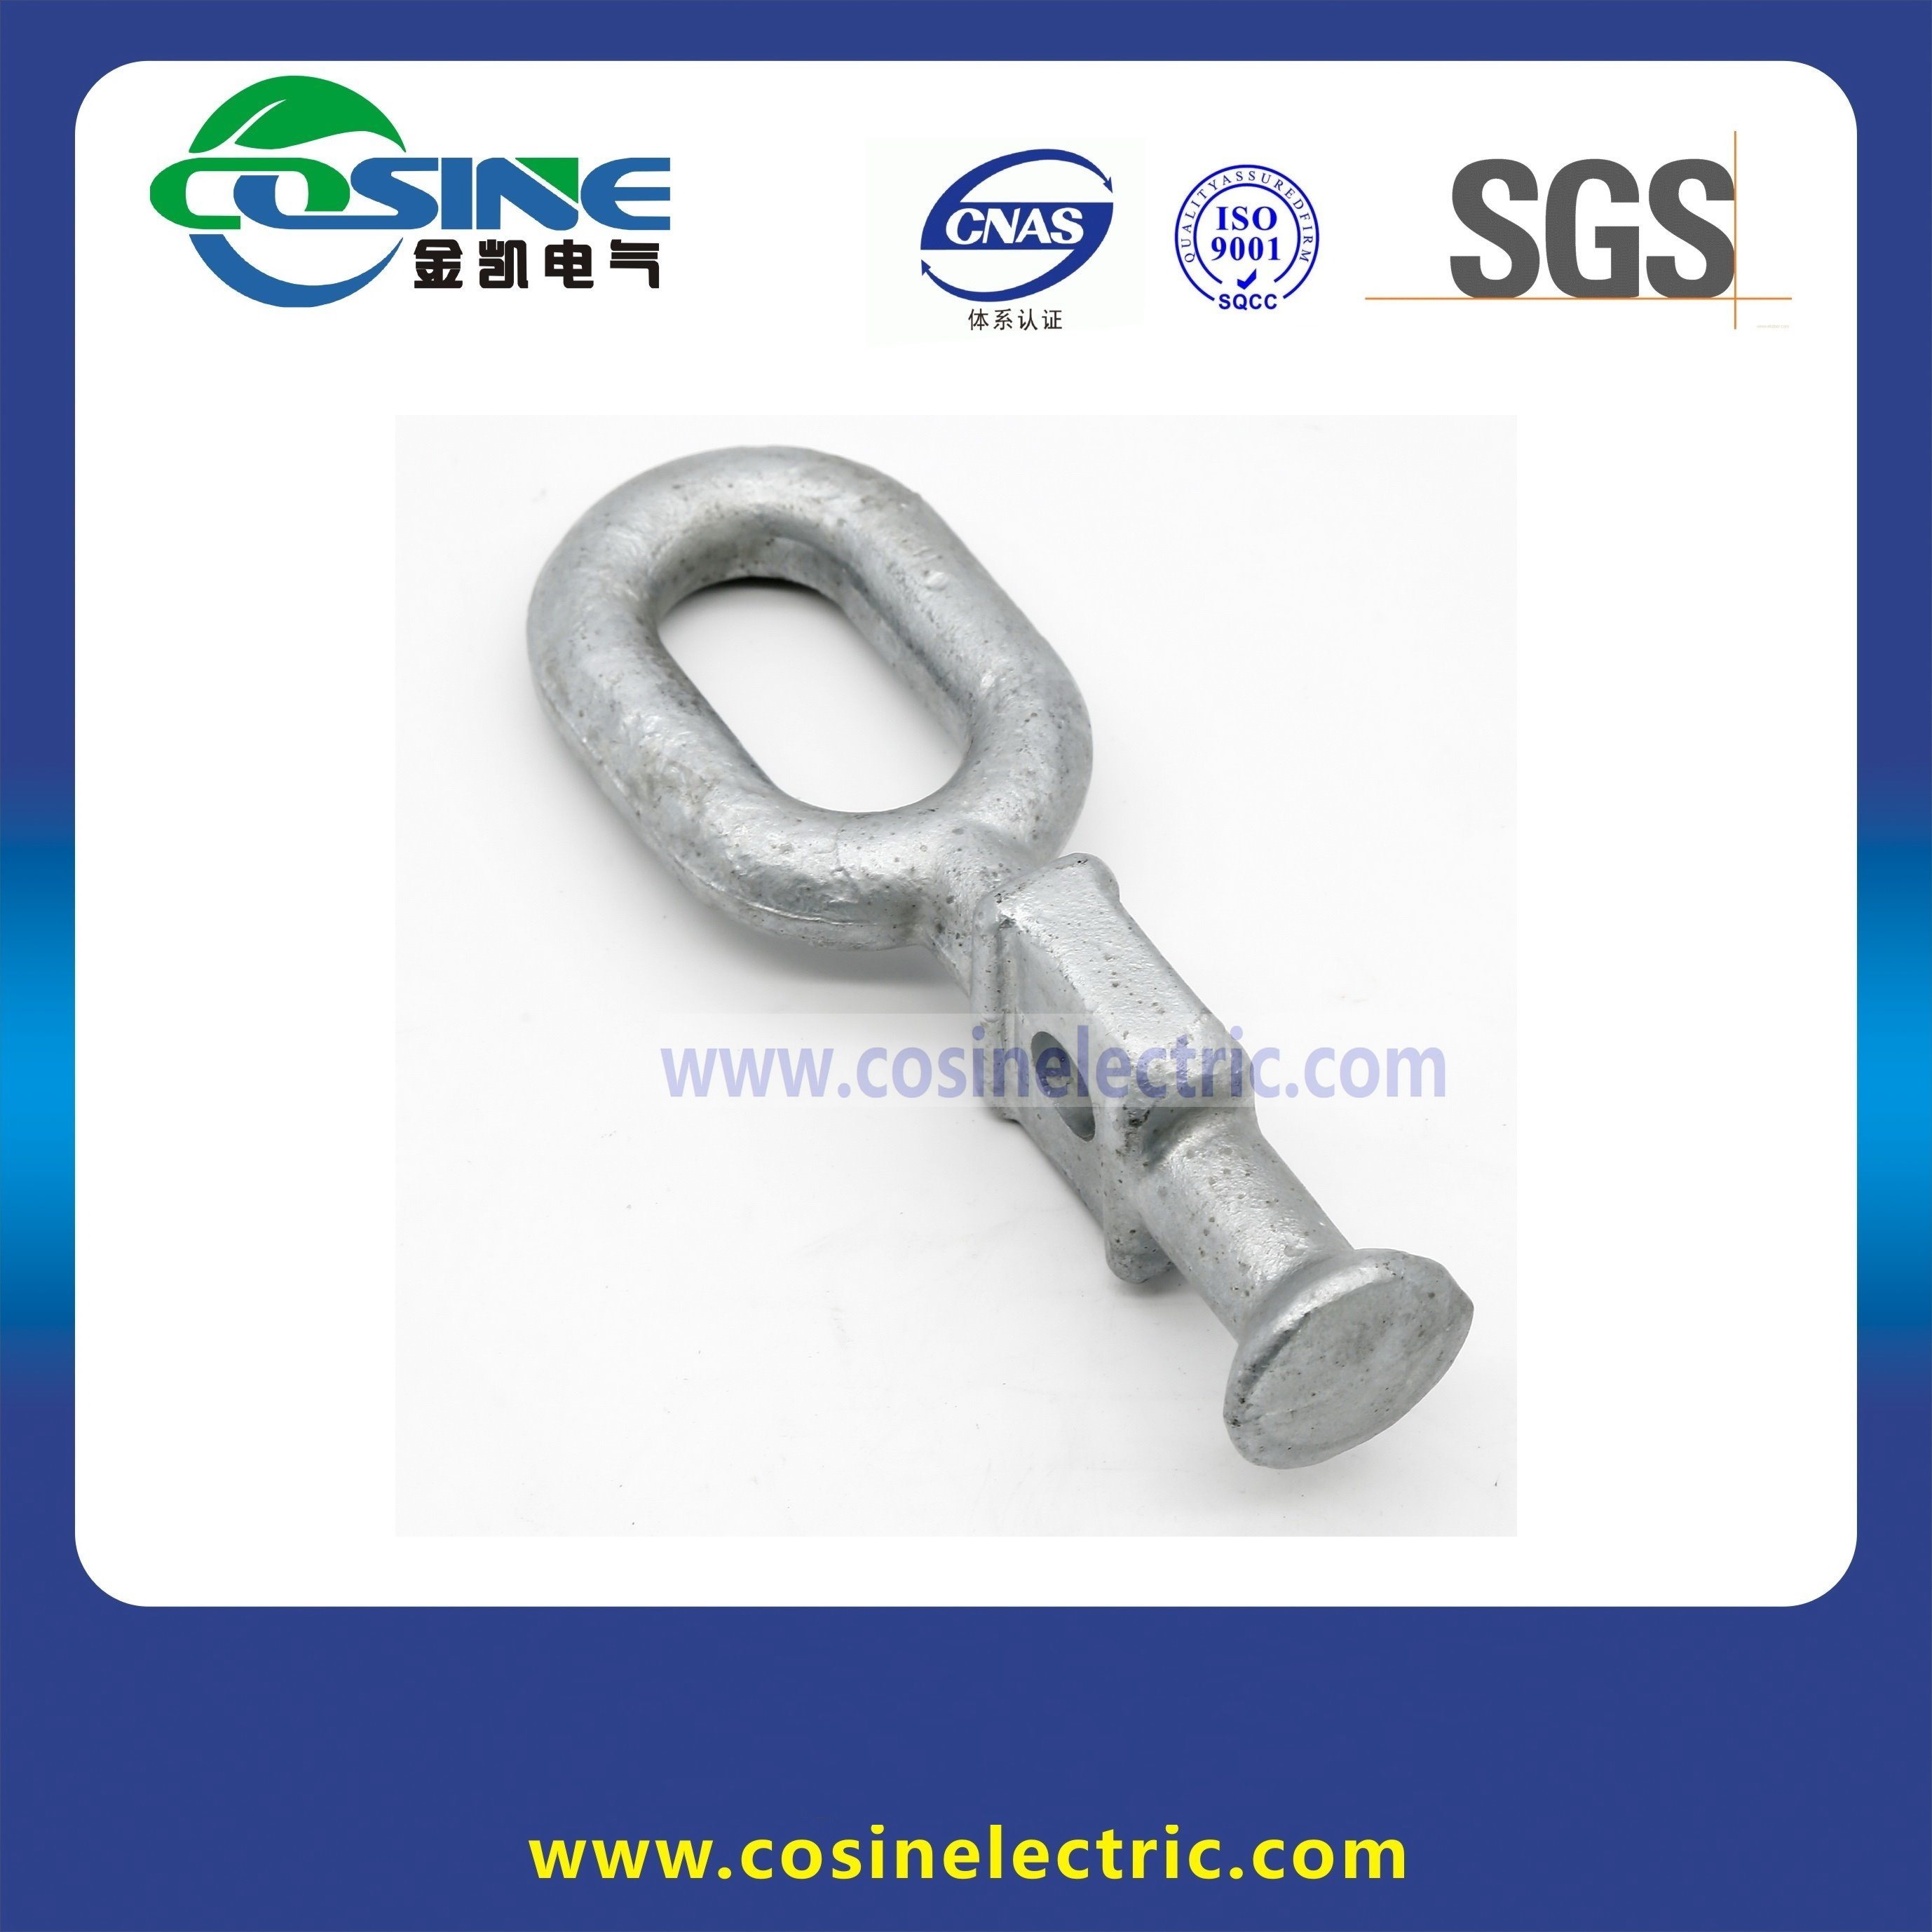 
                        Hot DIP Galvanized Forged Ball Eyes for Insulator Connection
                    